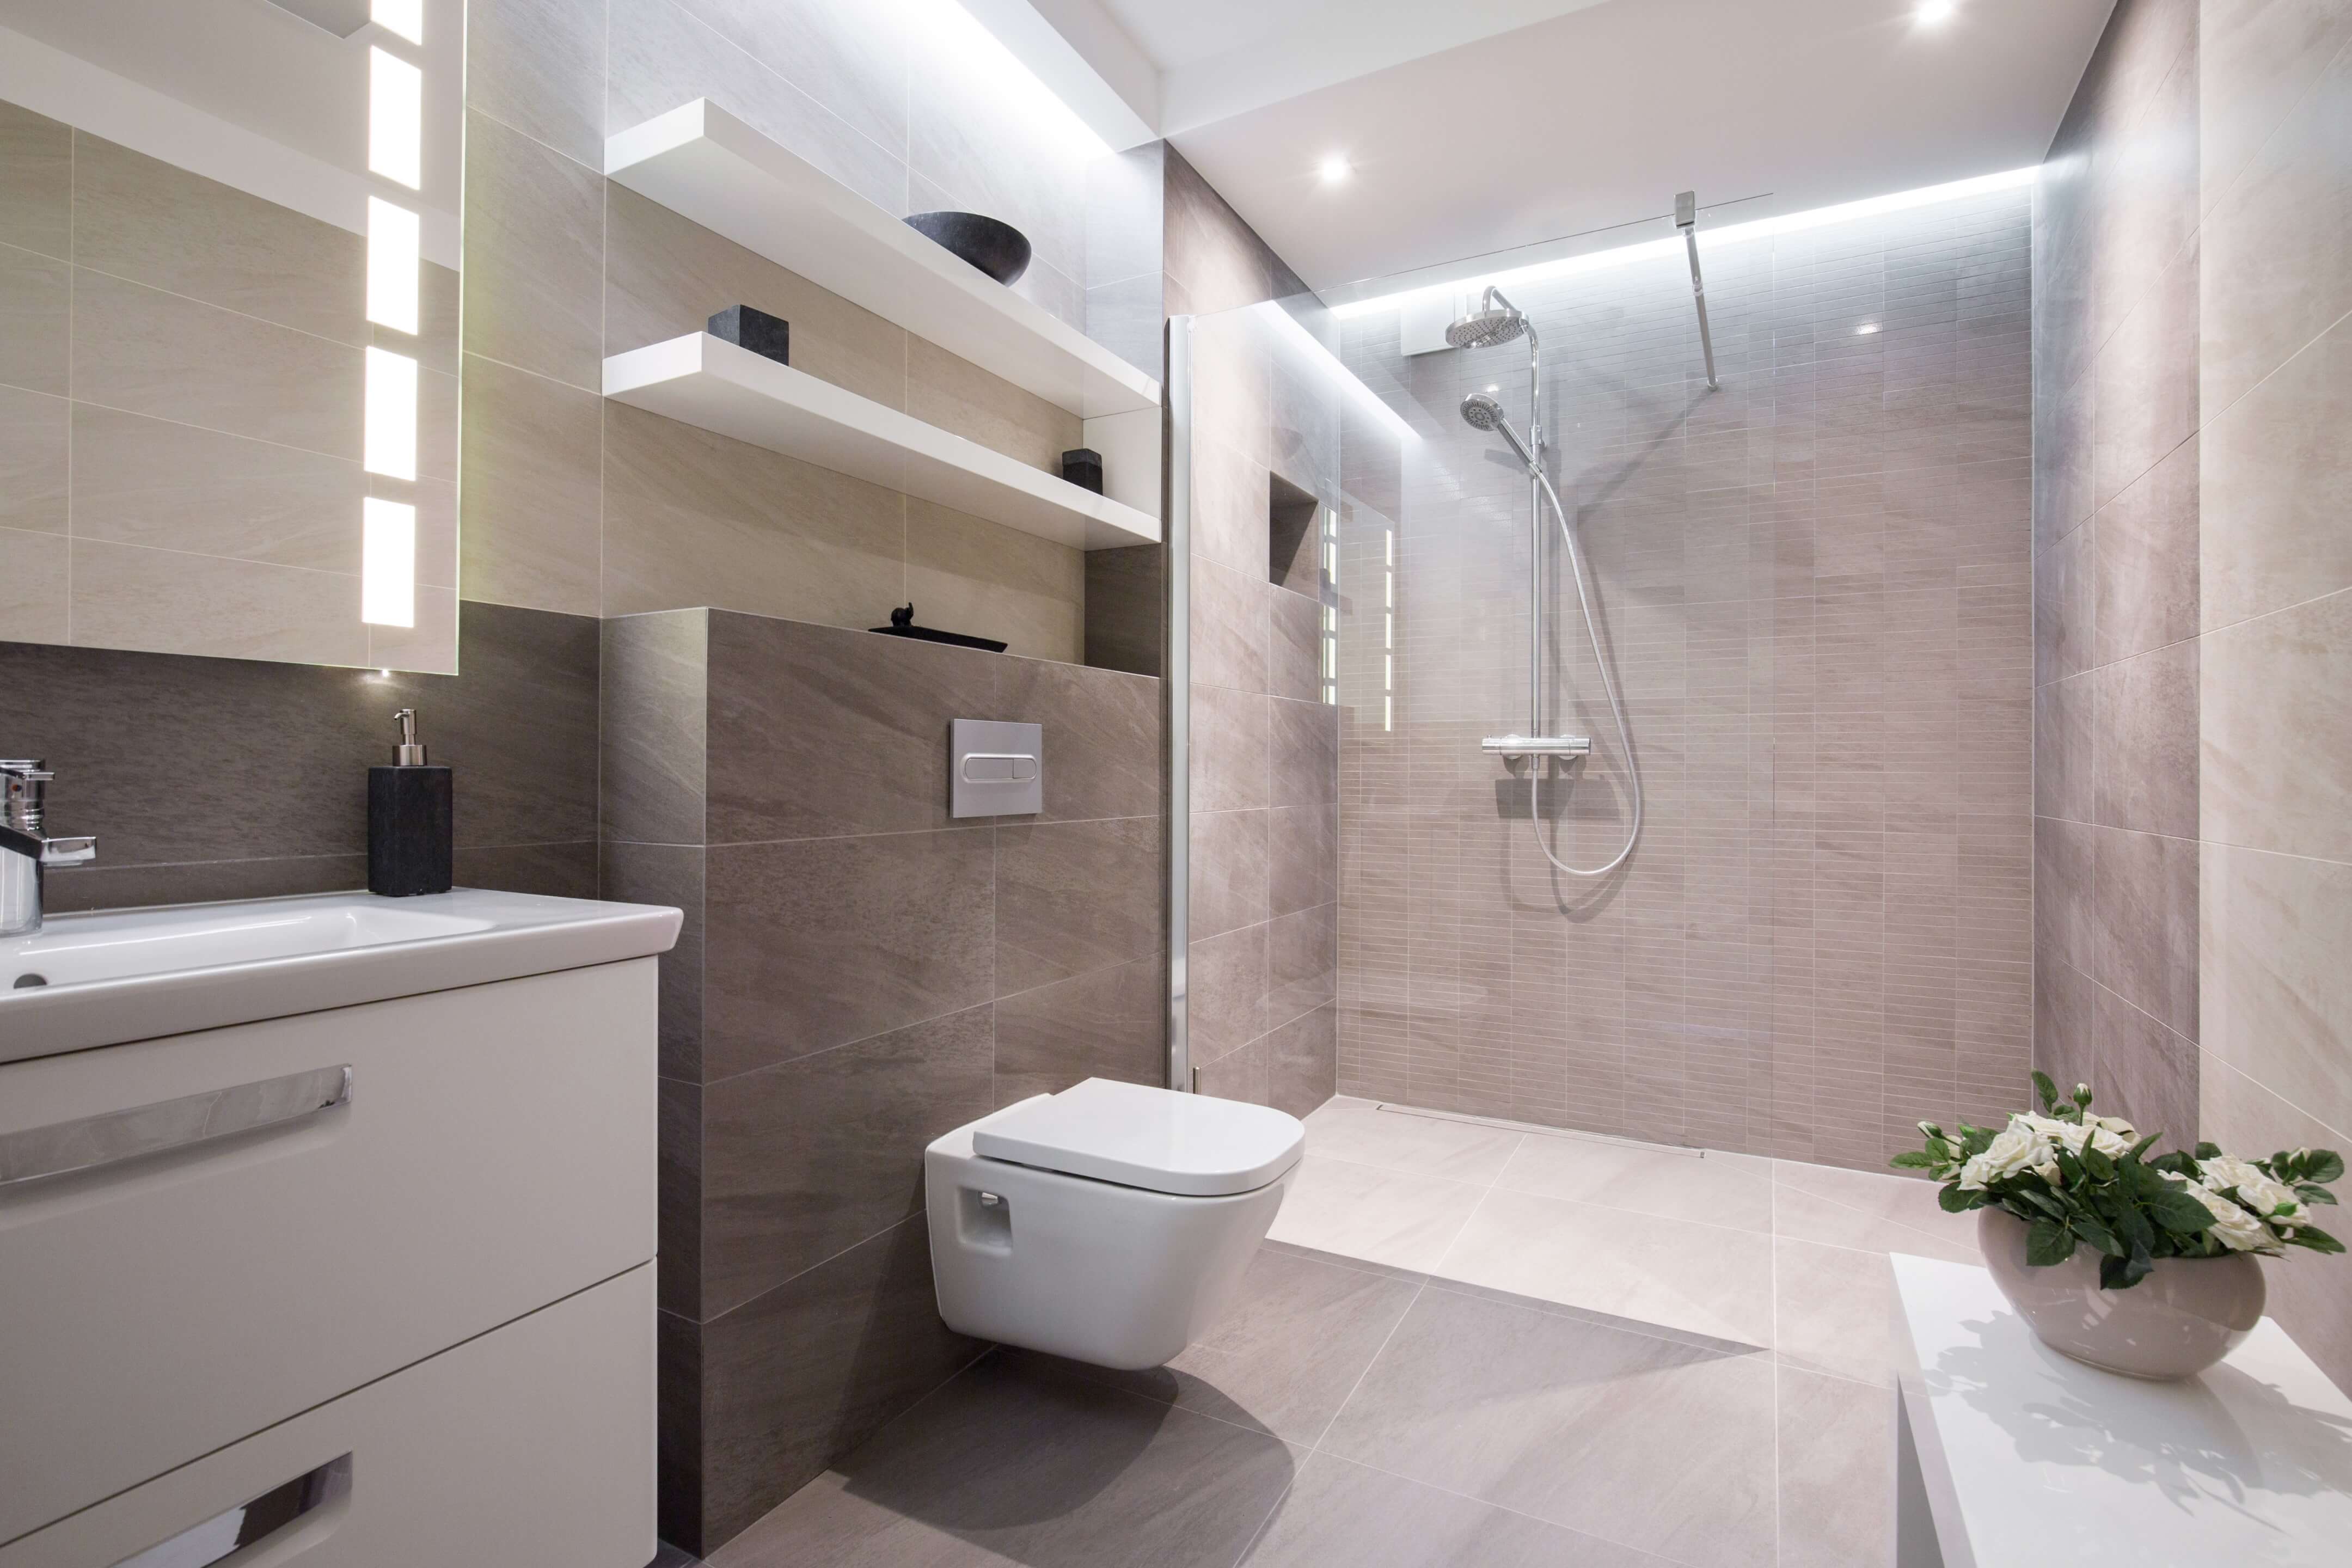 local bathroom fitters fulham